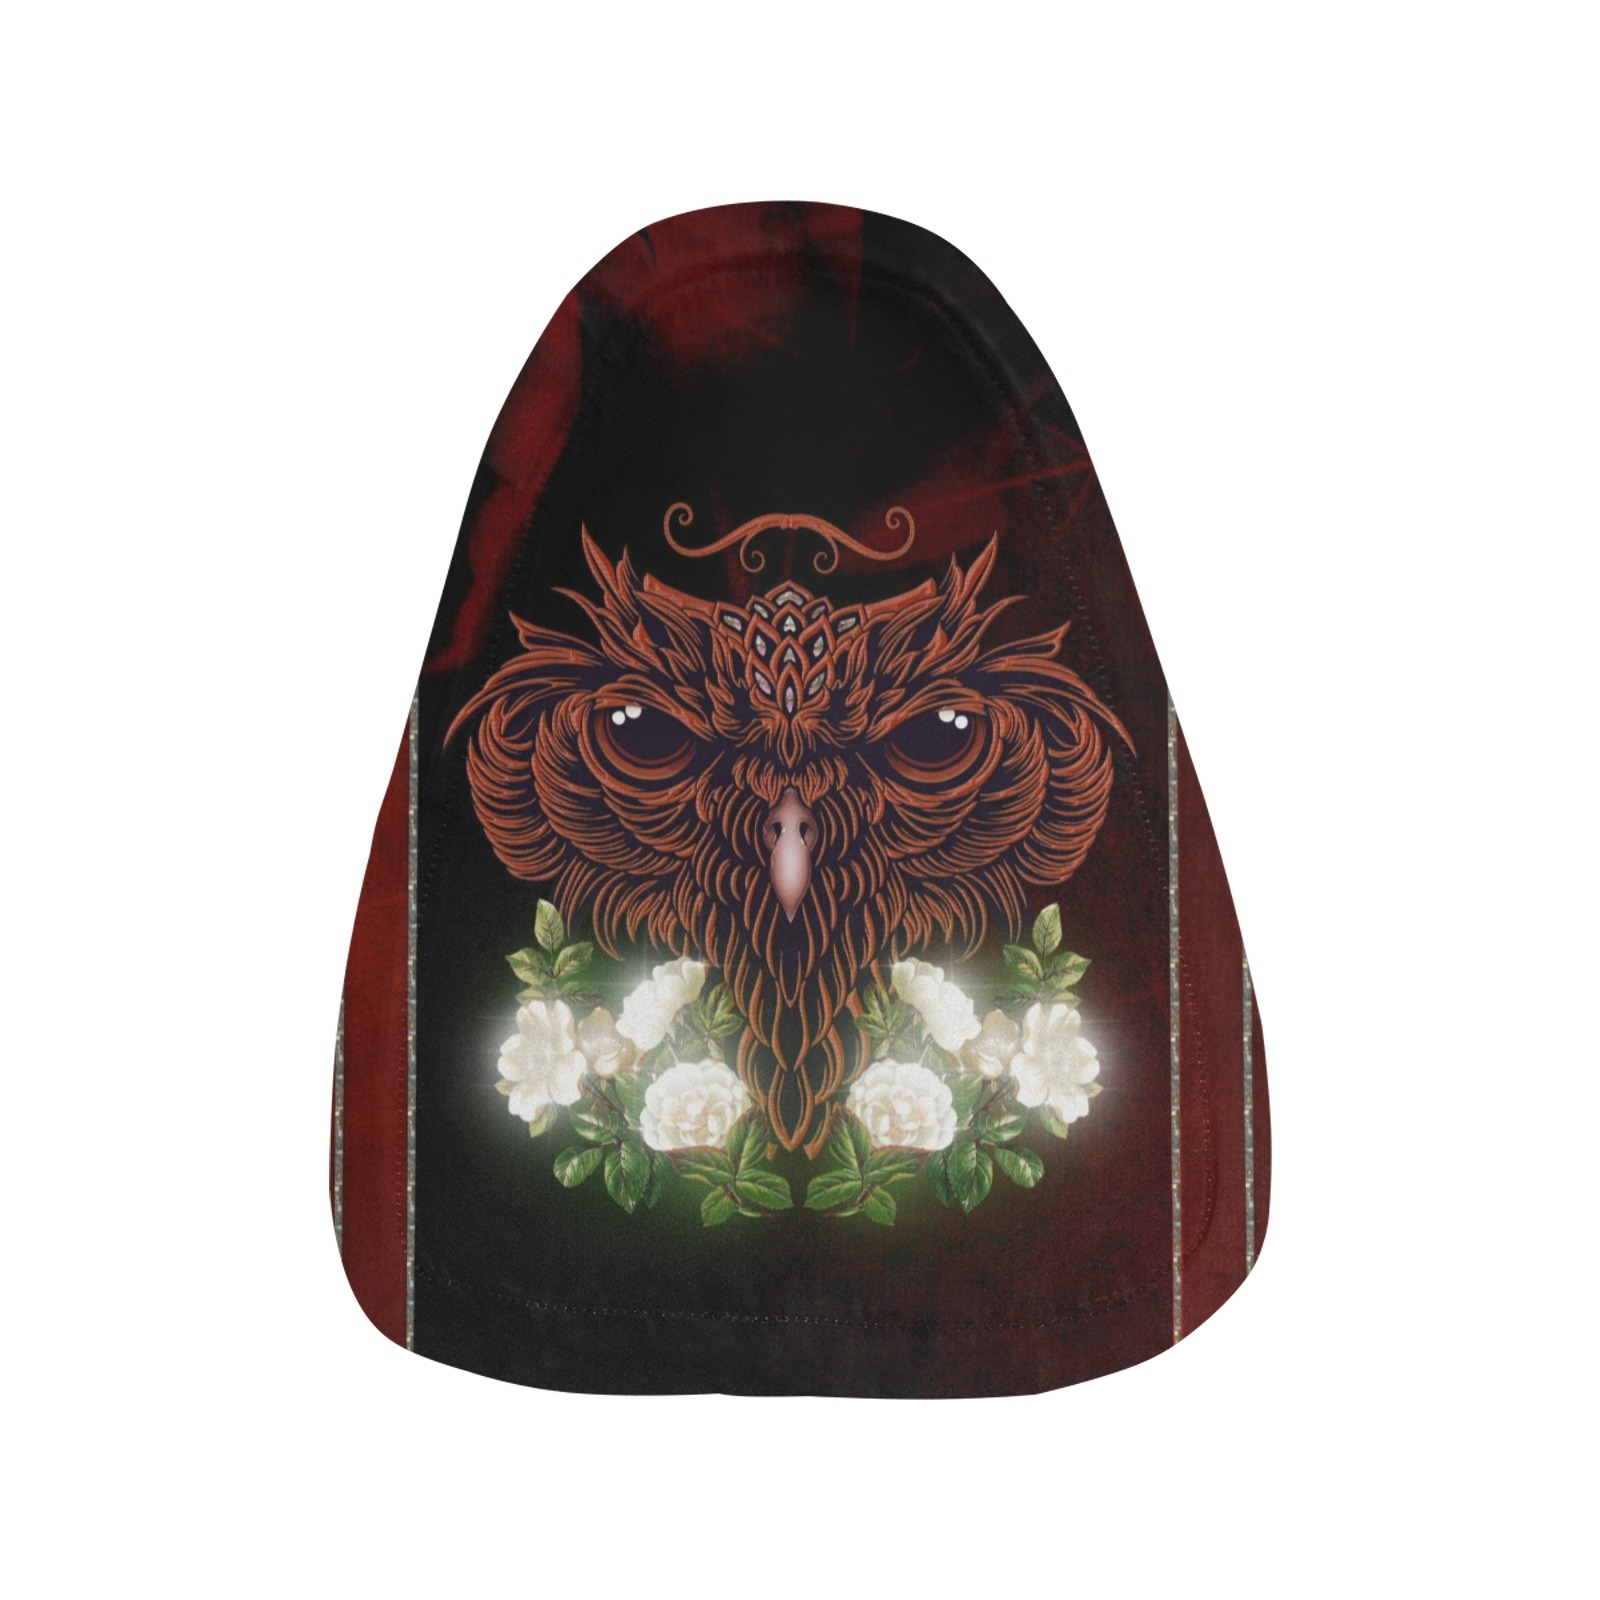 Awesome owl with flowers Waterproof Bicycle Seat Cover